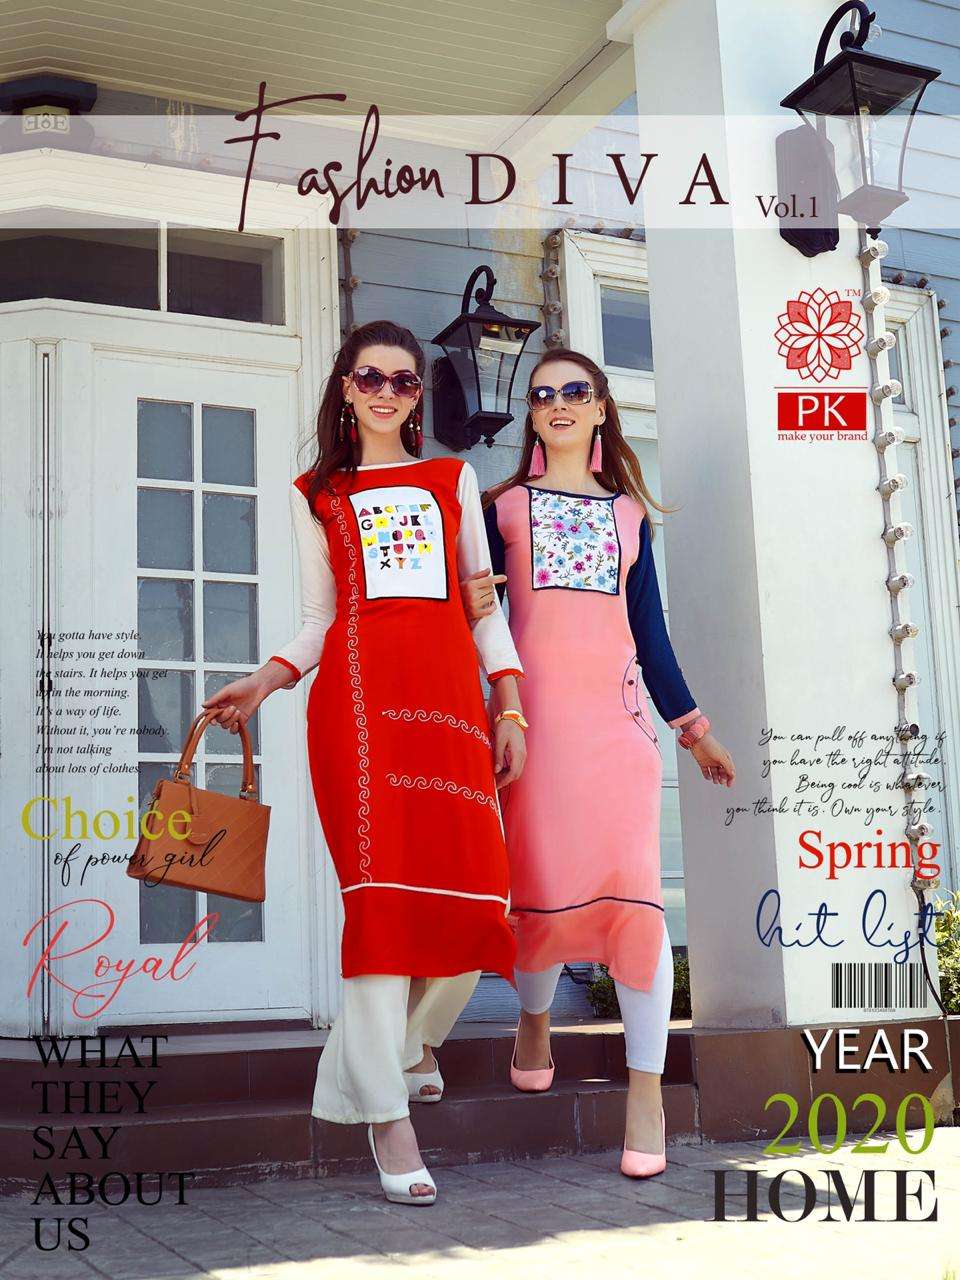 FASHION DIVA VOL-1 BY PK 1001 TO 1007 SERIES BEAUTIFUL COLORFUL STYLISH FANCY CASUAL WEAR & ETHNIC WEAR & READY TO WEAR HEAVY RAYON DIGITAL PRINT KURTIS AT WHOLESALE PRICE